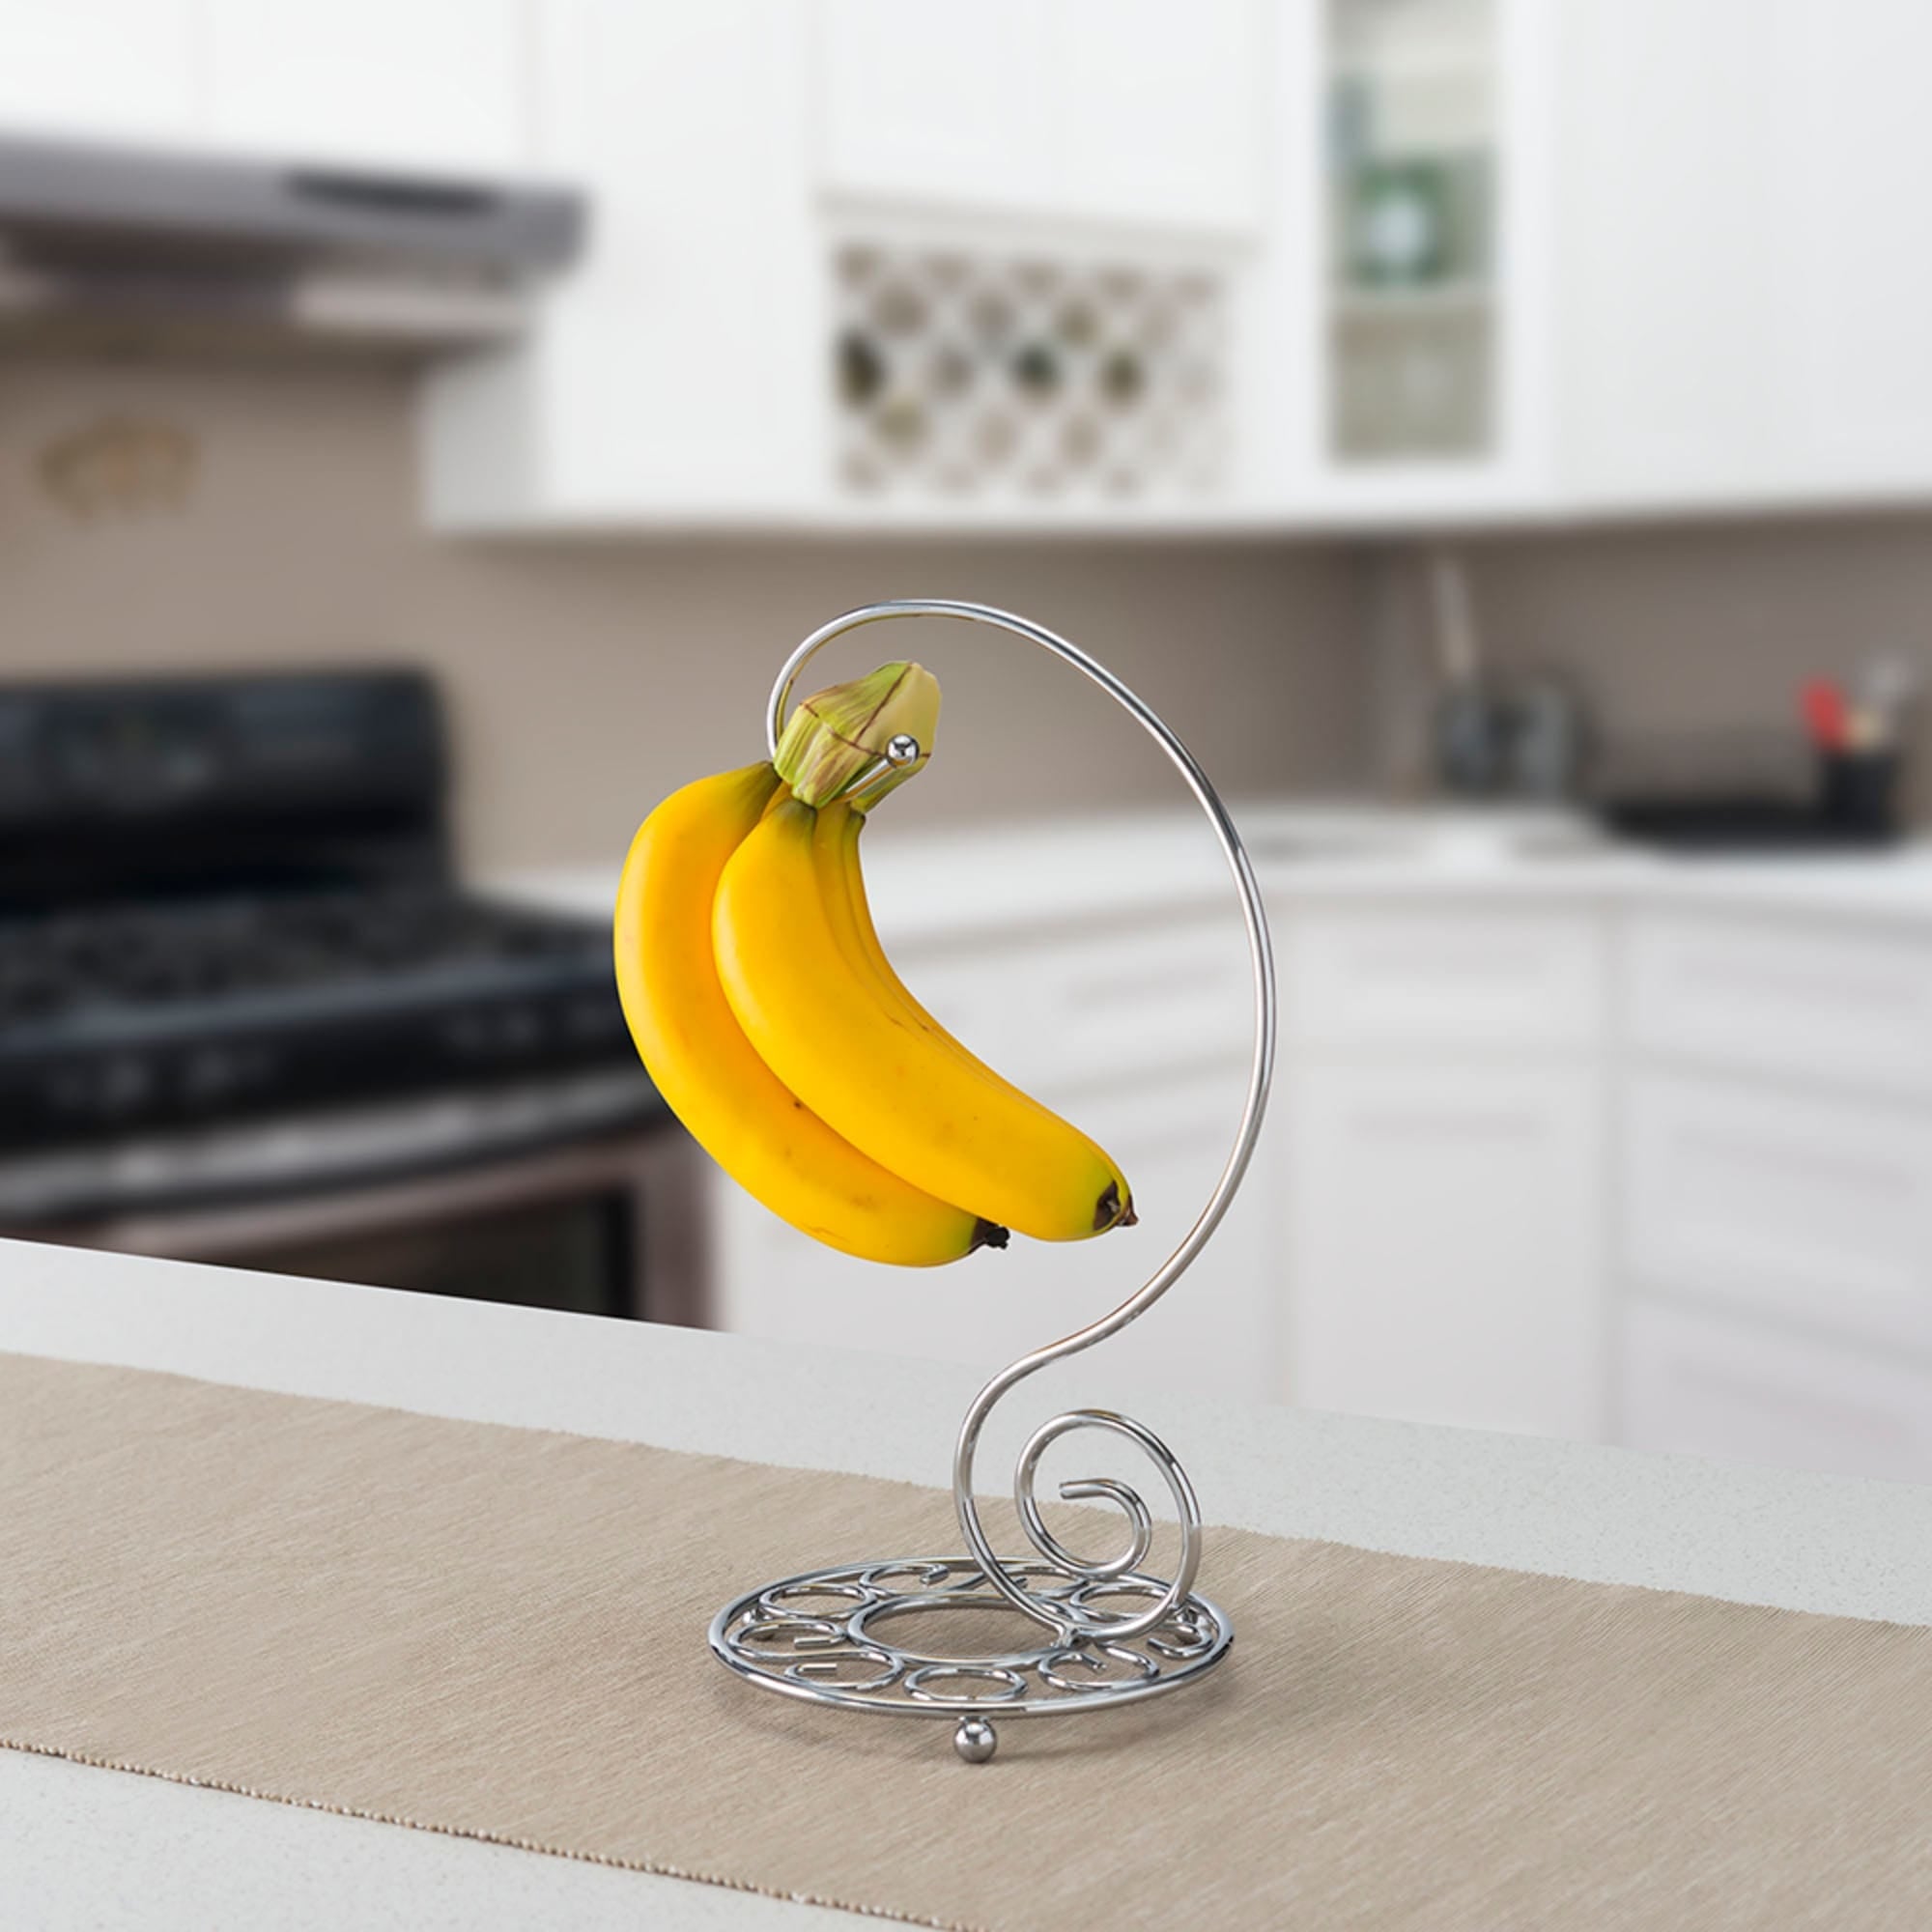 Home Basics Chrome Plated Steel Scroll Collection Banana Holder $5.00 EACH, CASE PACK OF 12